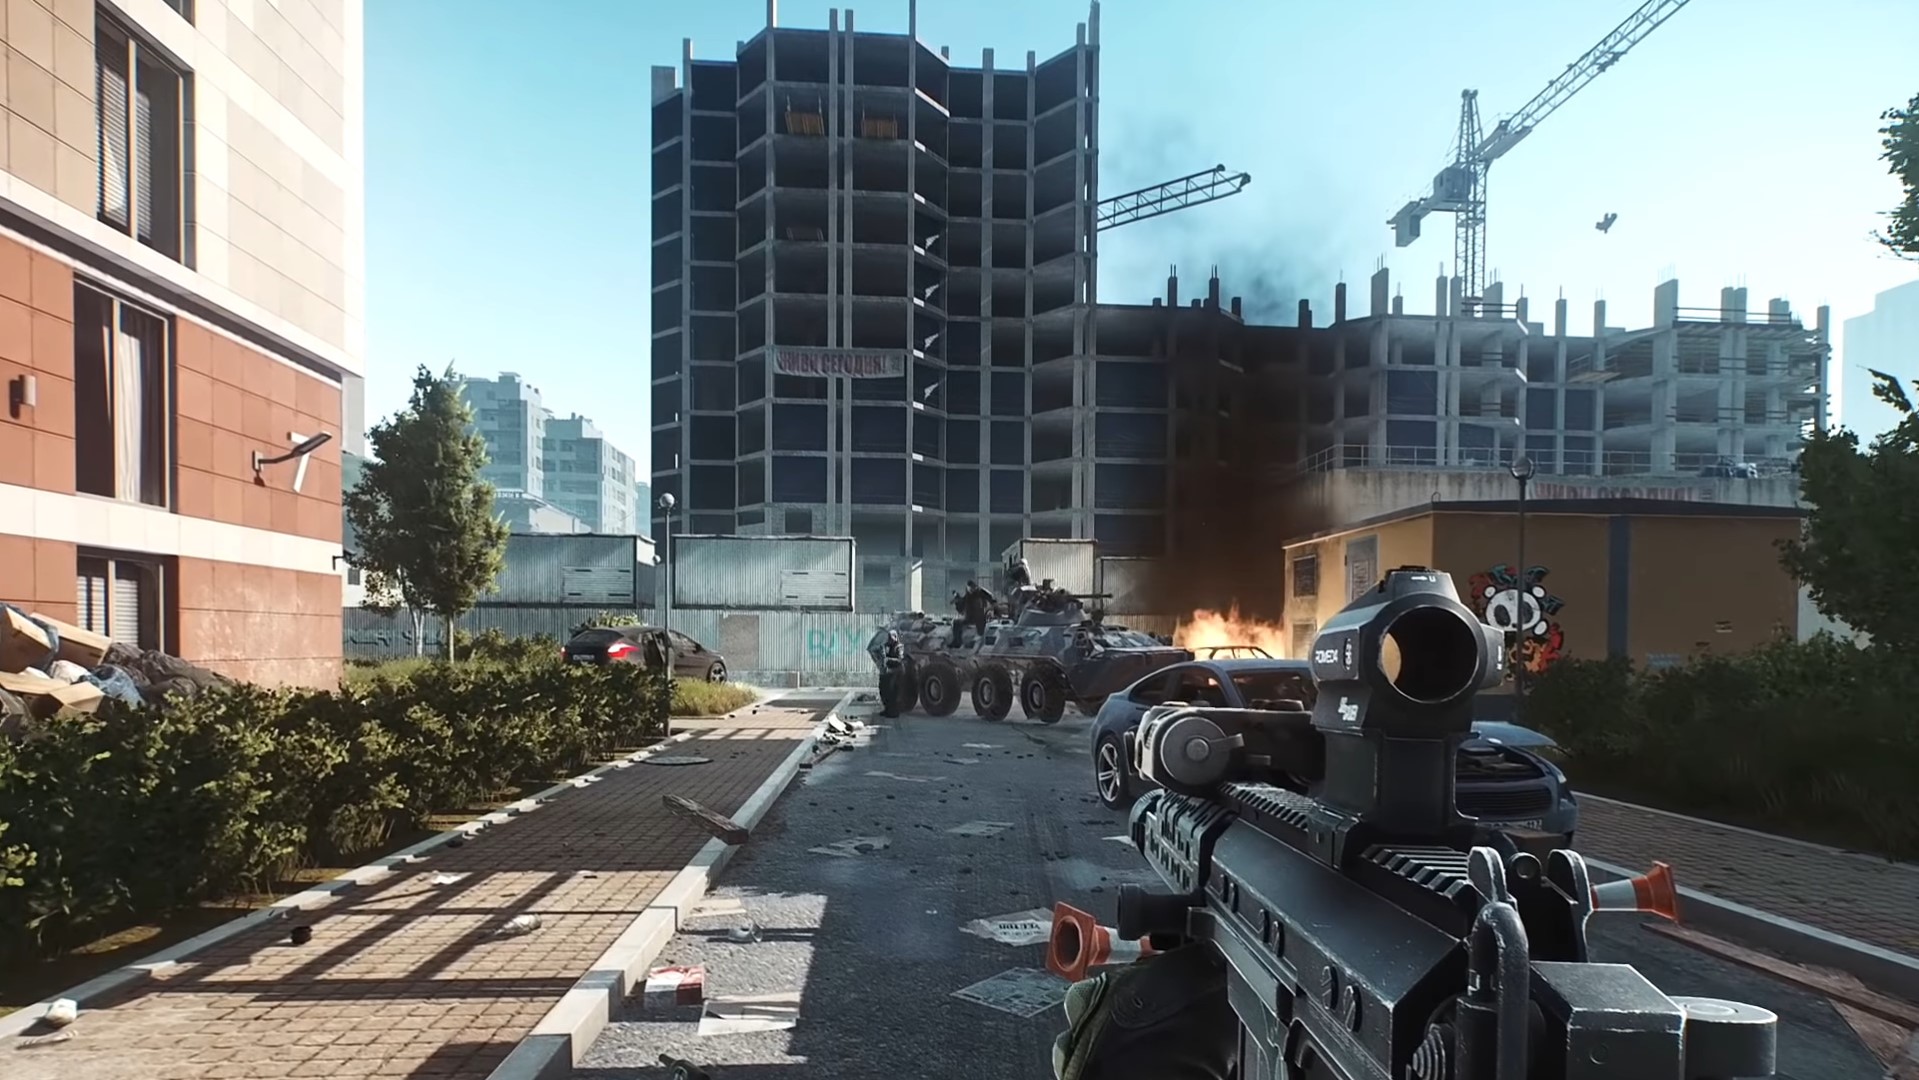 Escape from Tarkov’s new trailer shows off upcoming Streets of Tarkov map, again